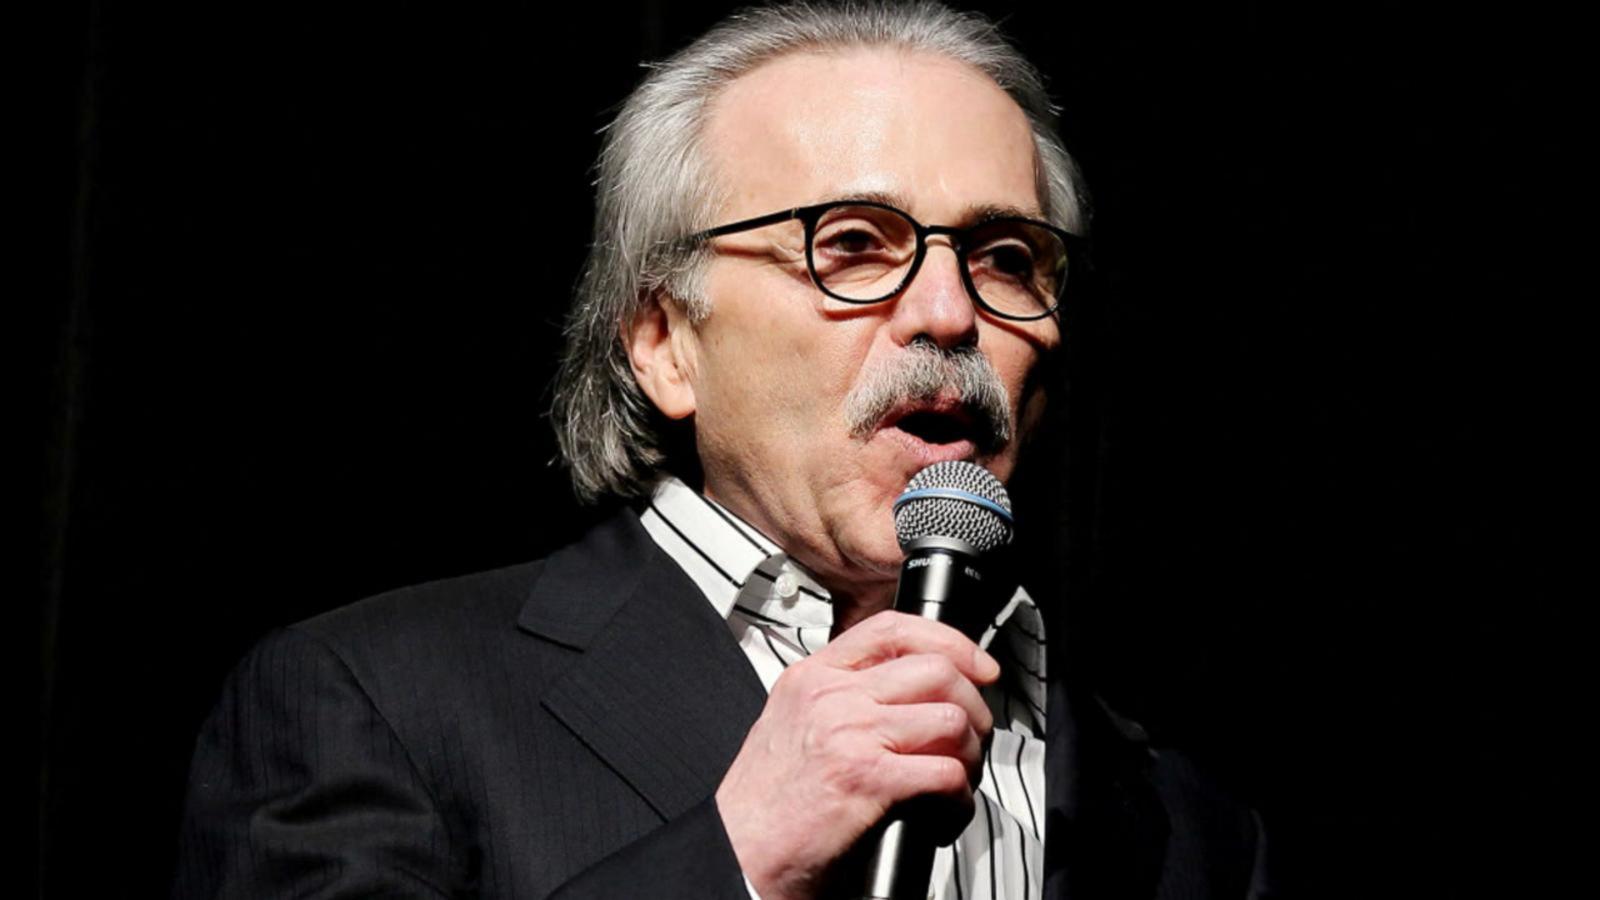 VIDEO: Ex-tabloid publisher David Pecker back on stand for day 2 of Trump criminal trial